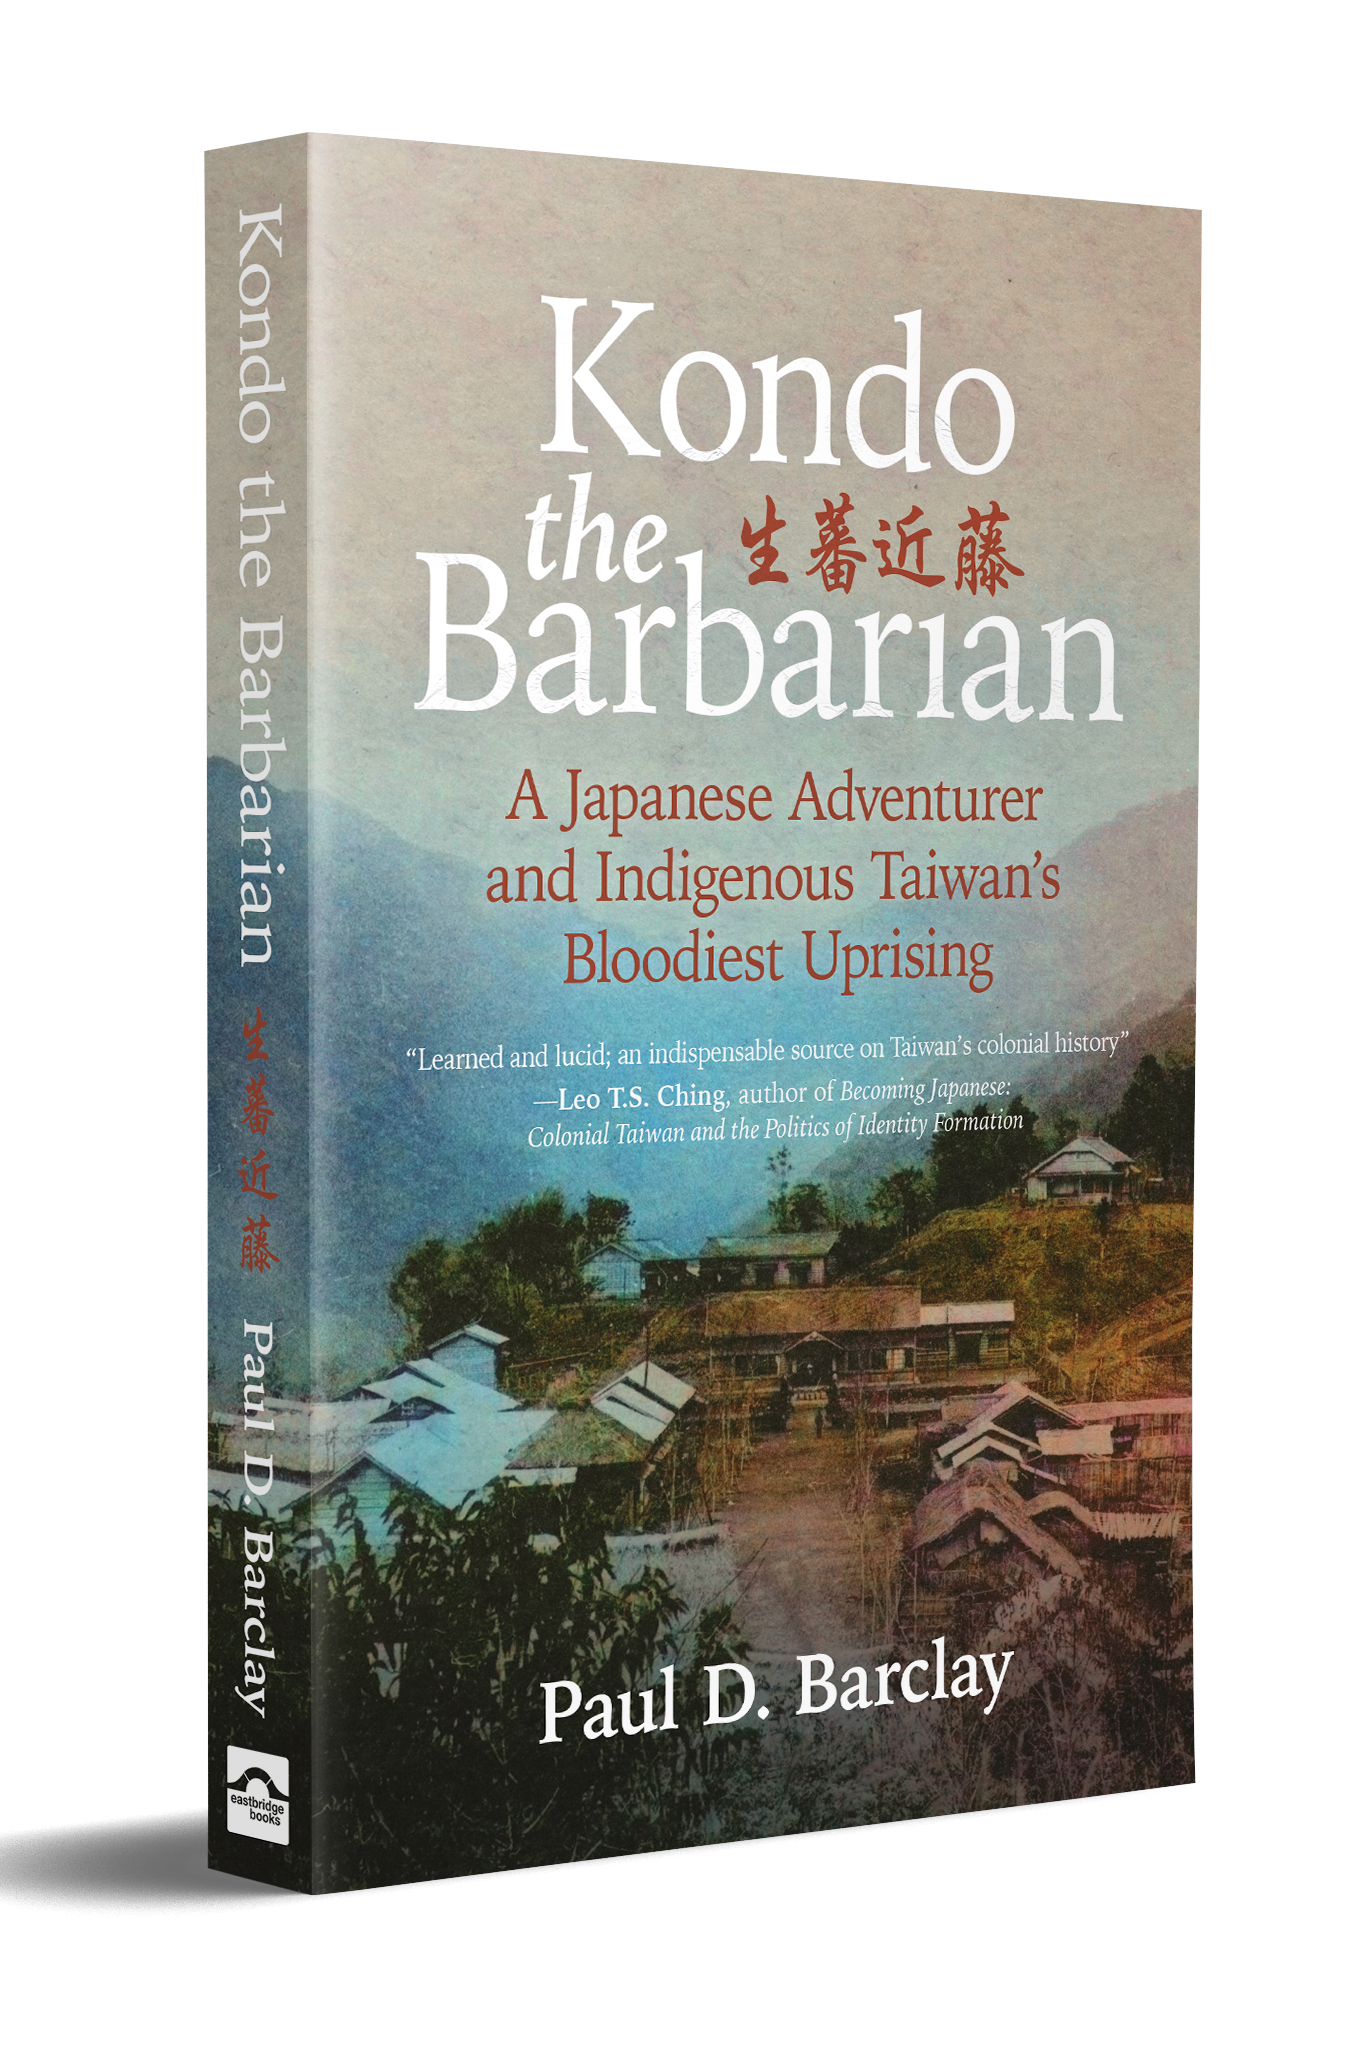 The paperback of Kondo the Barbarian, by Paul D. Barclay